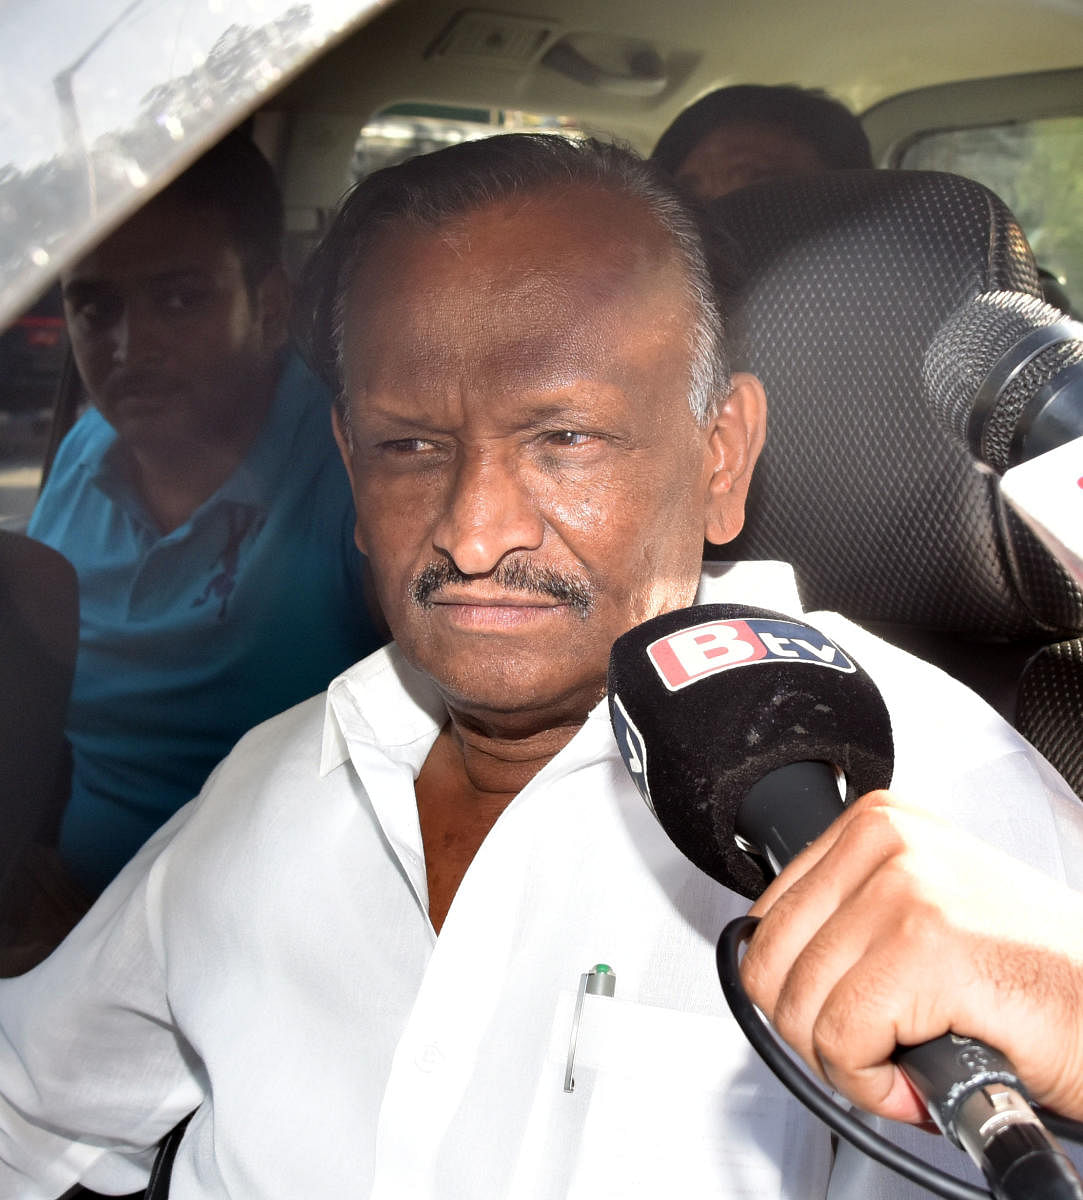 In the video, he said that MLAs had held 3-4 meetings under his leadership. "In these meetings, he had criticised the injustice meted to senior Congress leaders and had decided to resign," Nagaraj said.